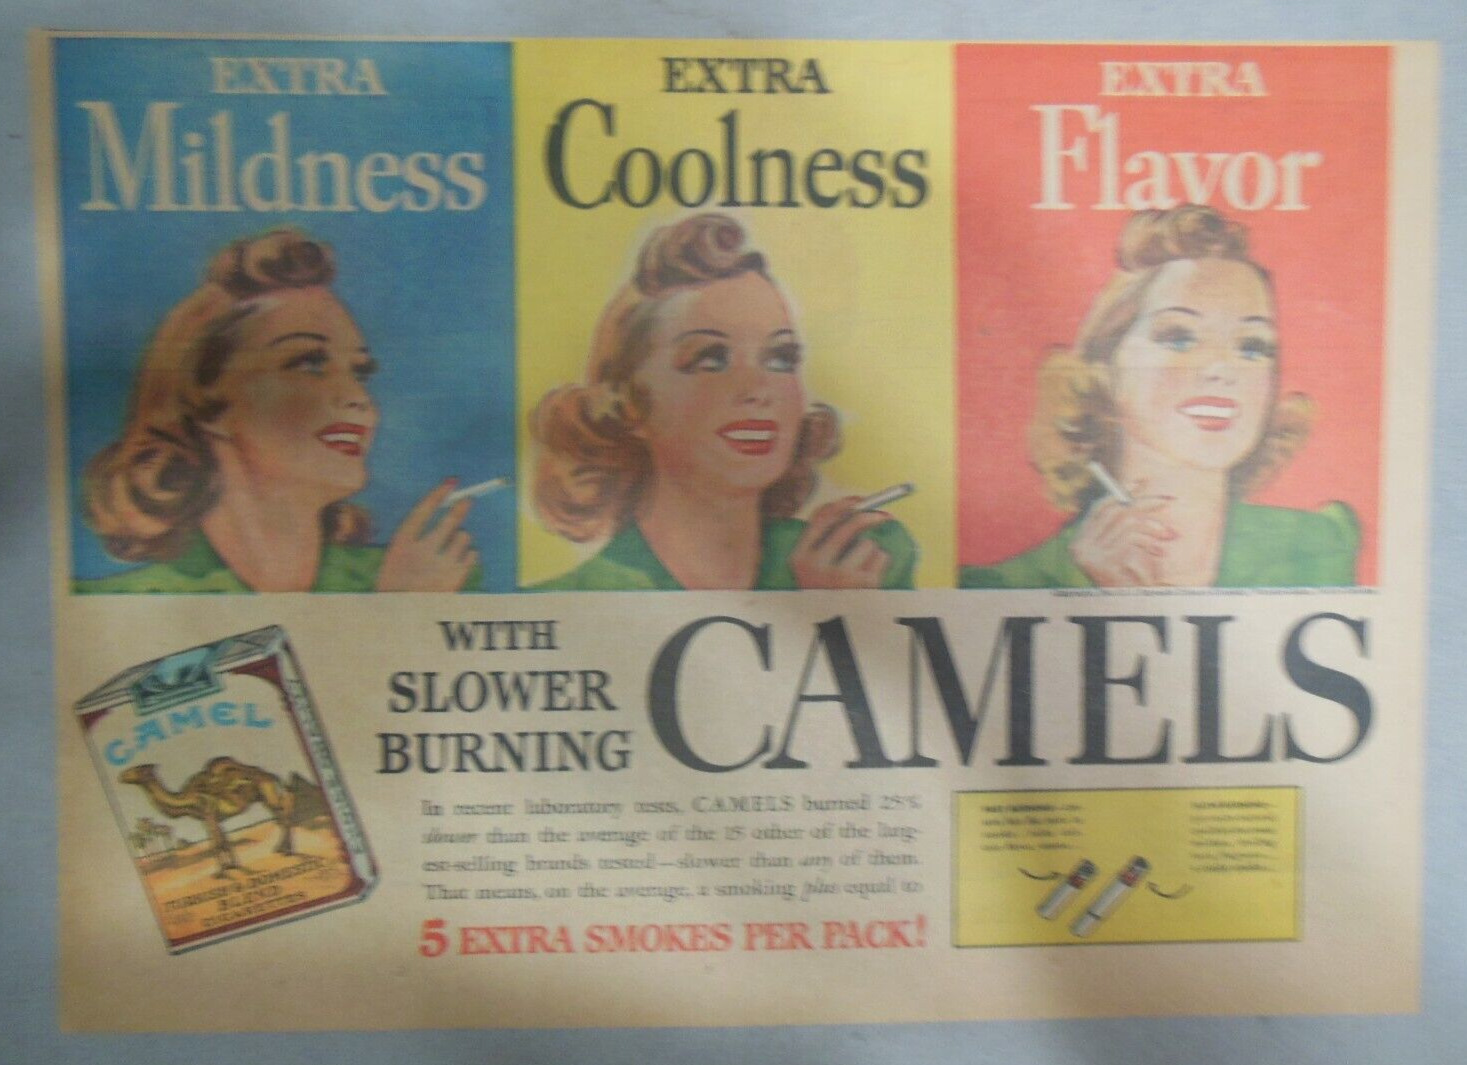 Camel Cigarette Ad: Extra Mildness, Coolness  from 1940  Size: 11 x 15 inch